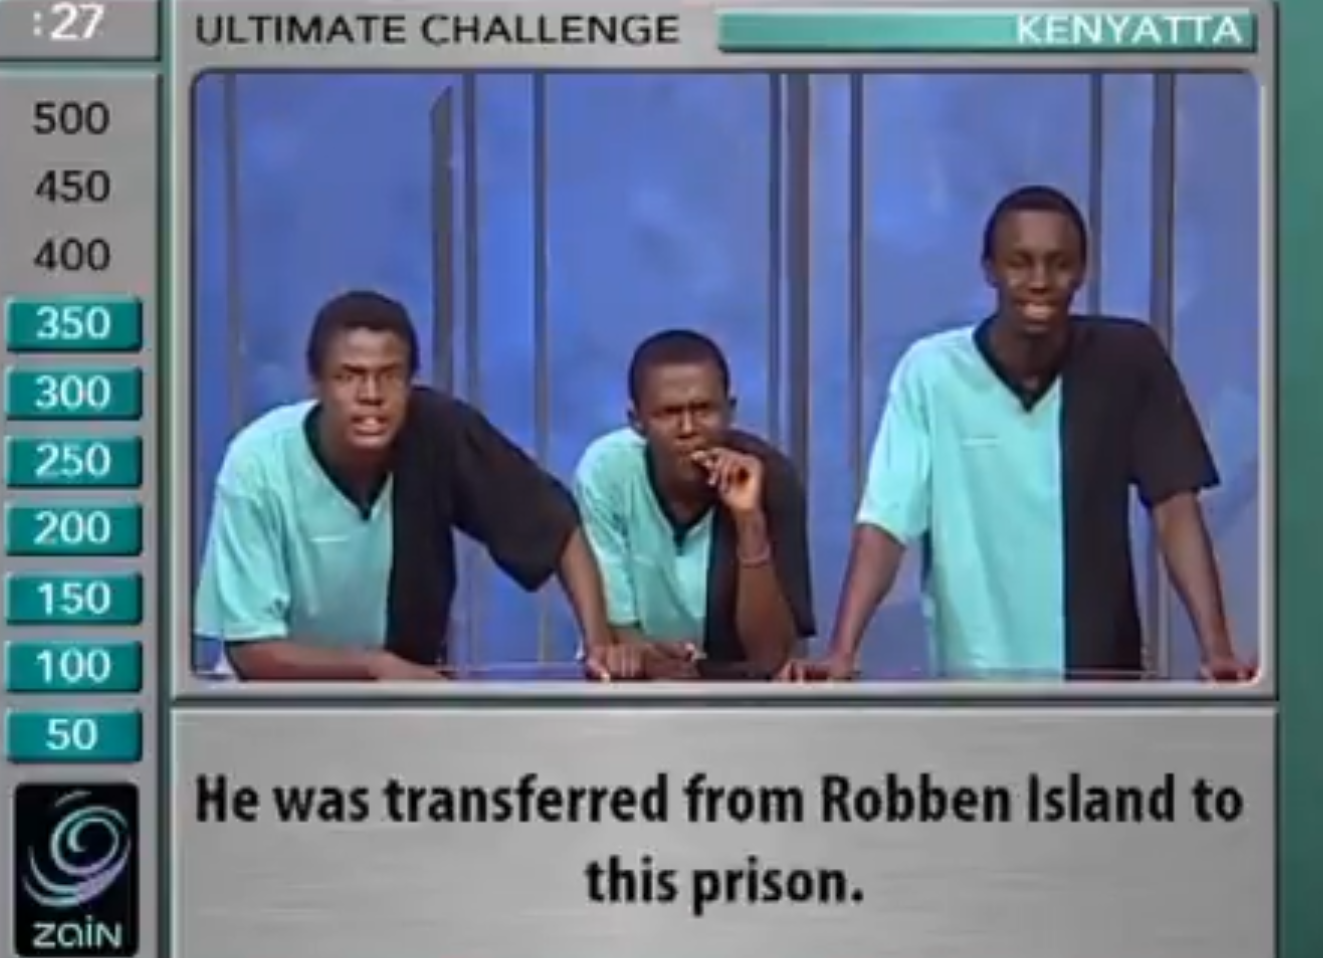 Mandela was transferred to which prison after Robben Island?